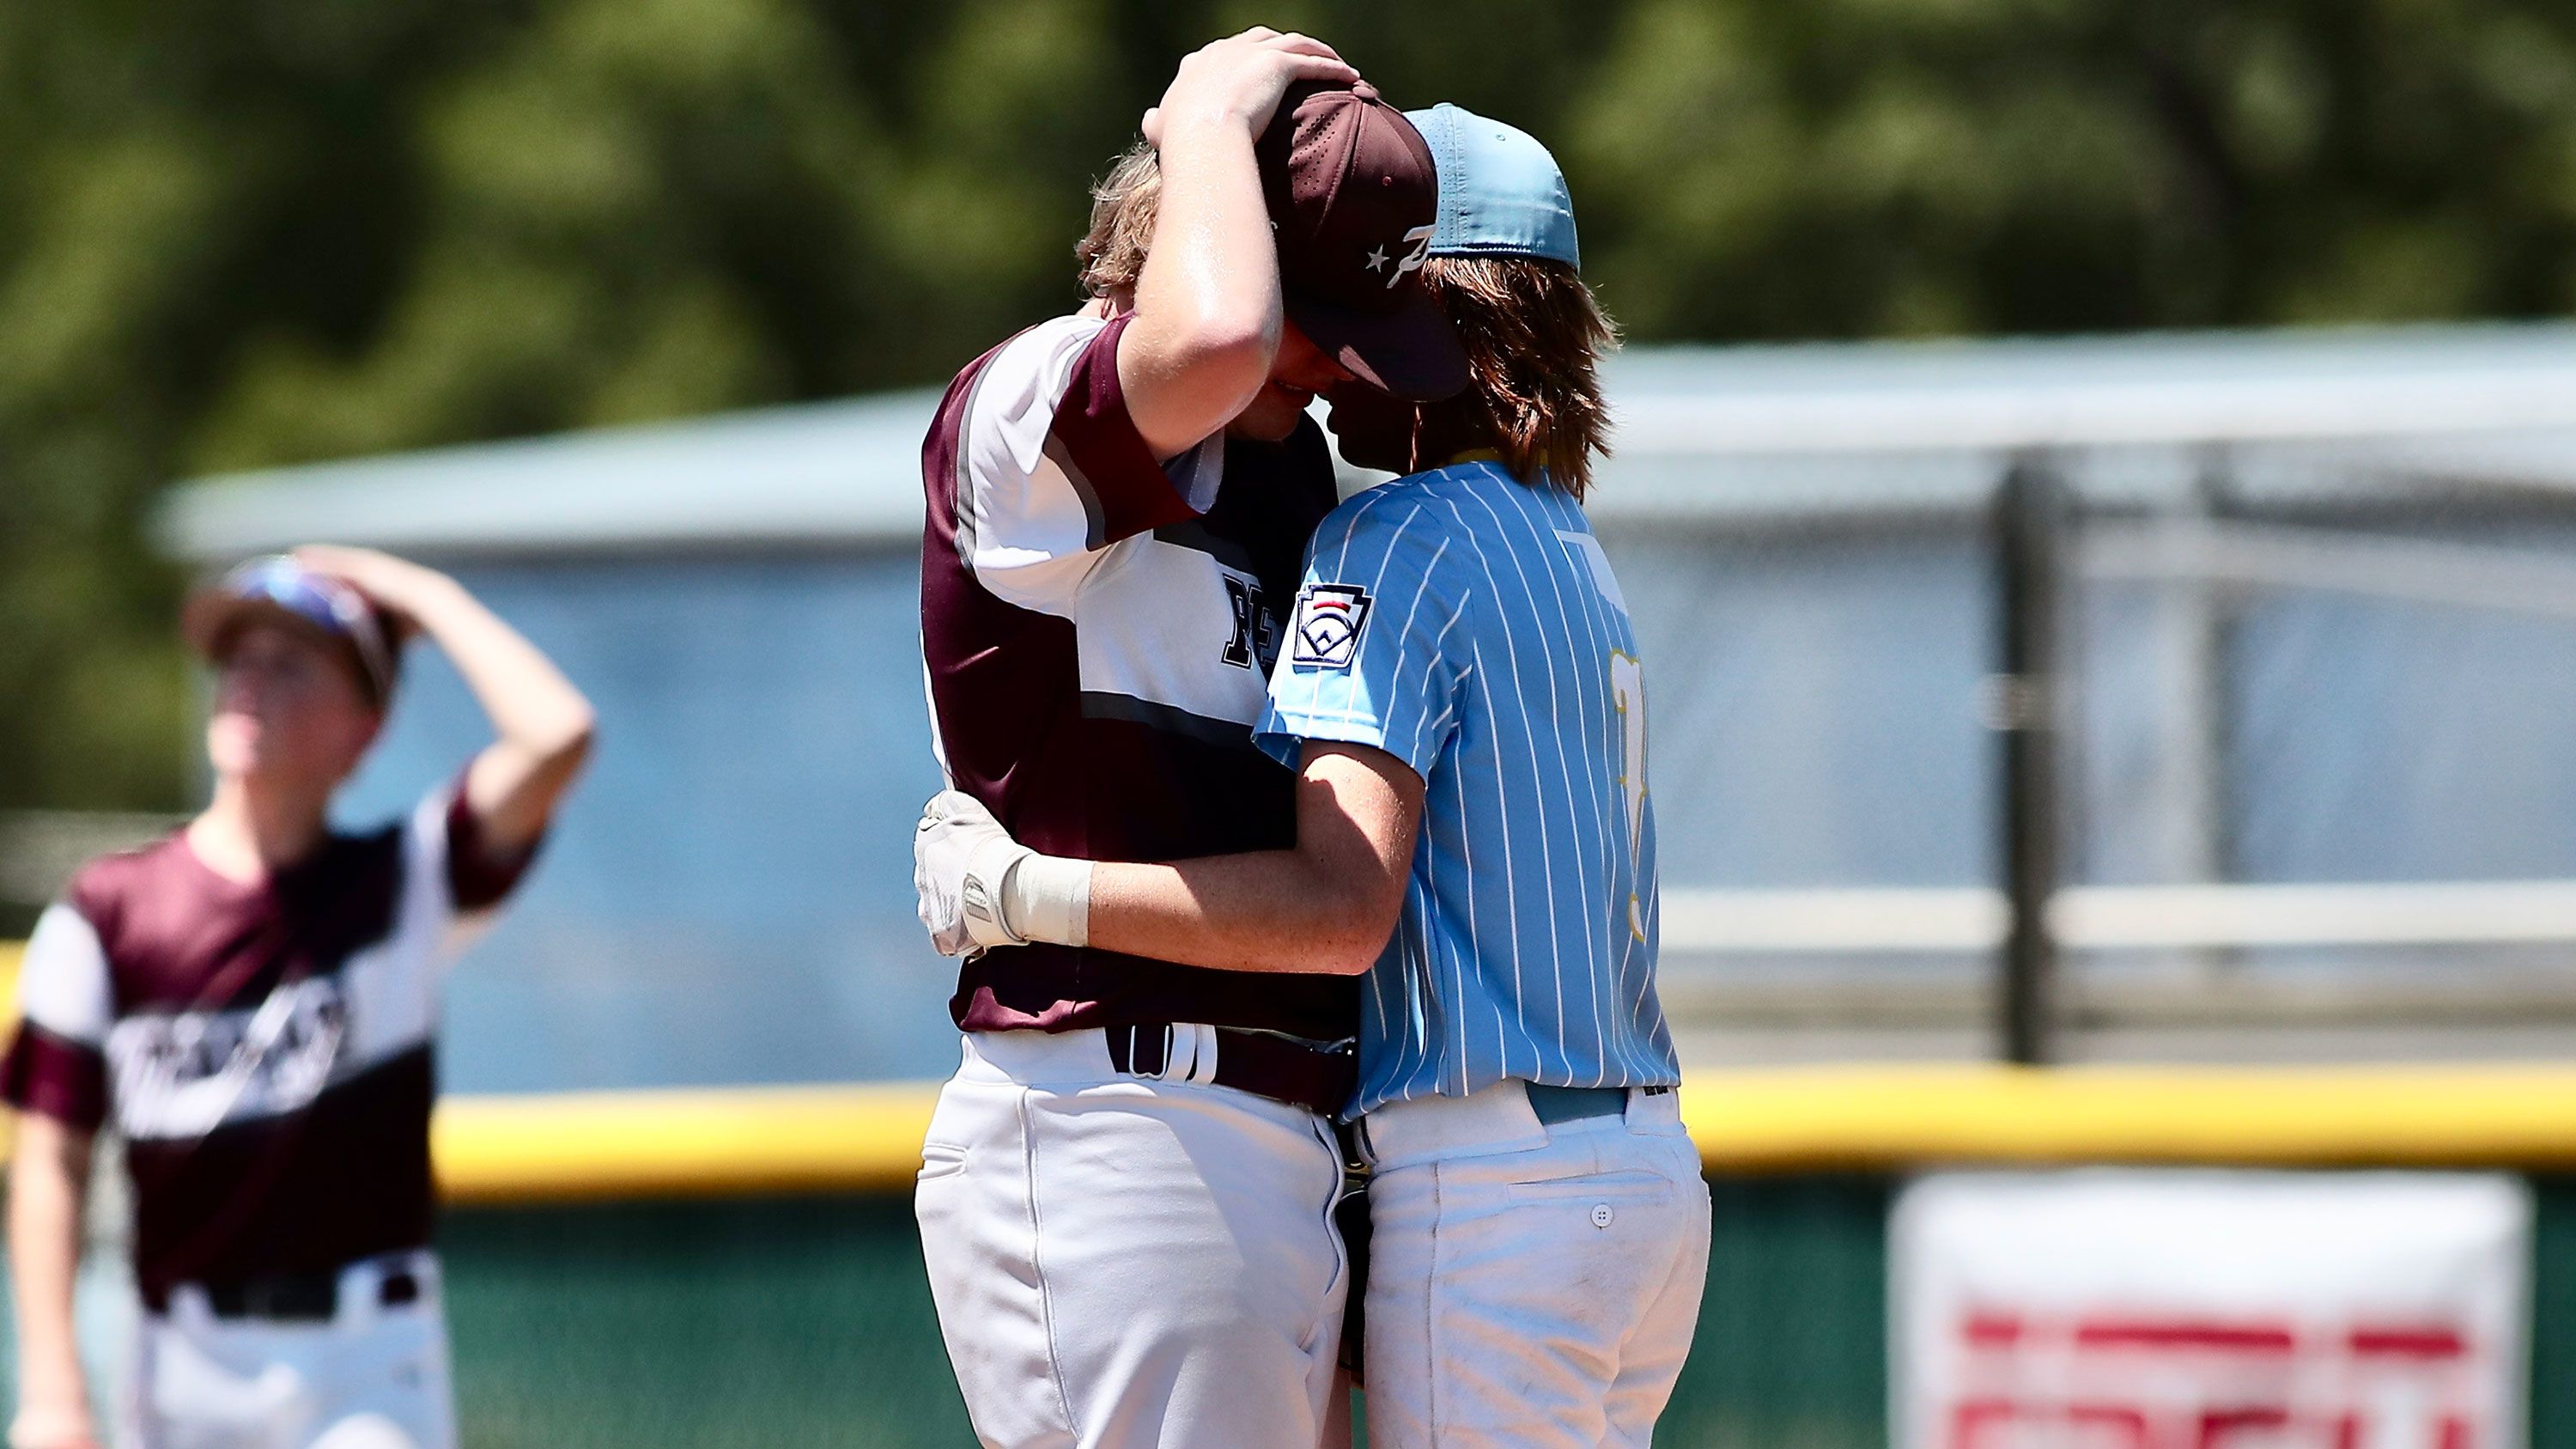 Little League batter embraces opposing pitcher after getting hit in  inspiring display of sportsmanship